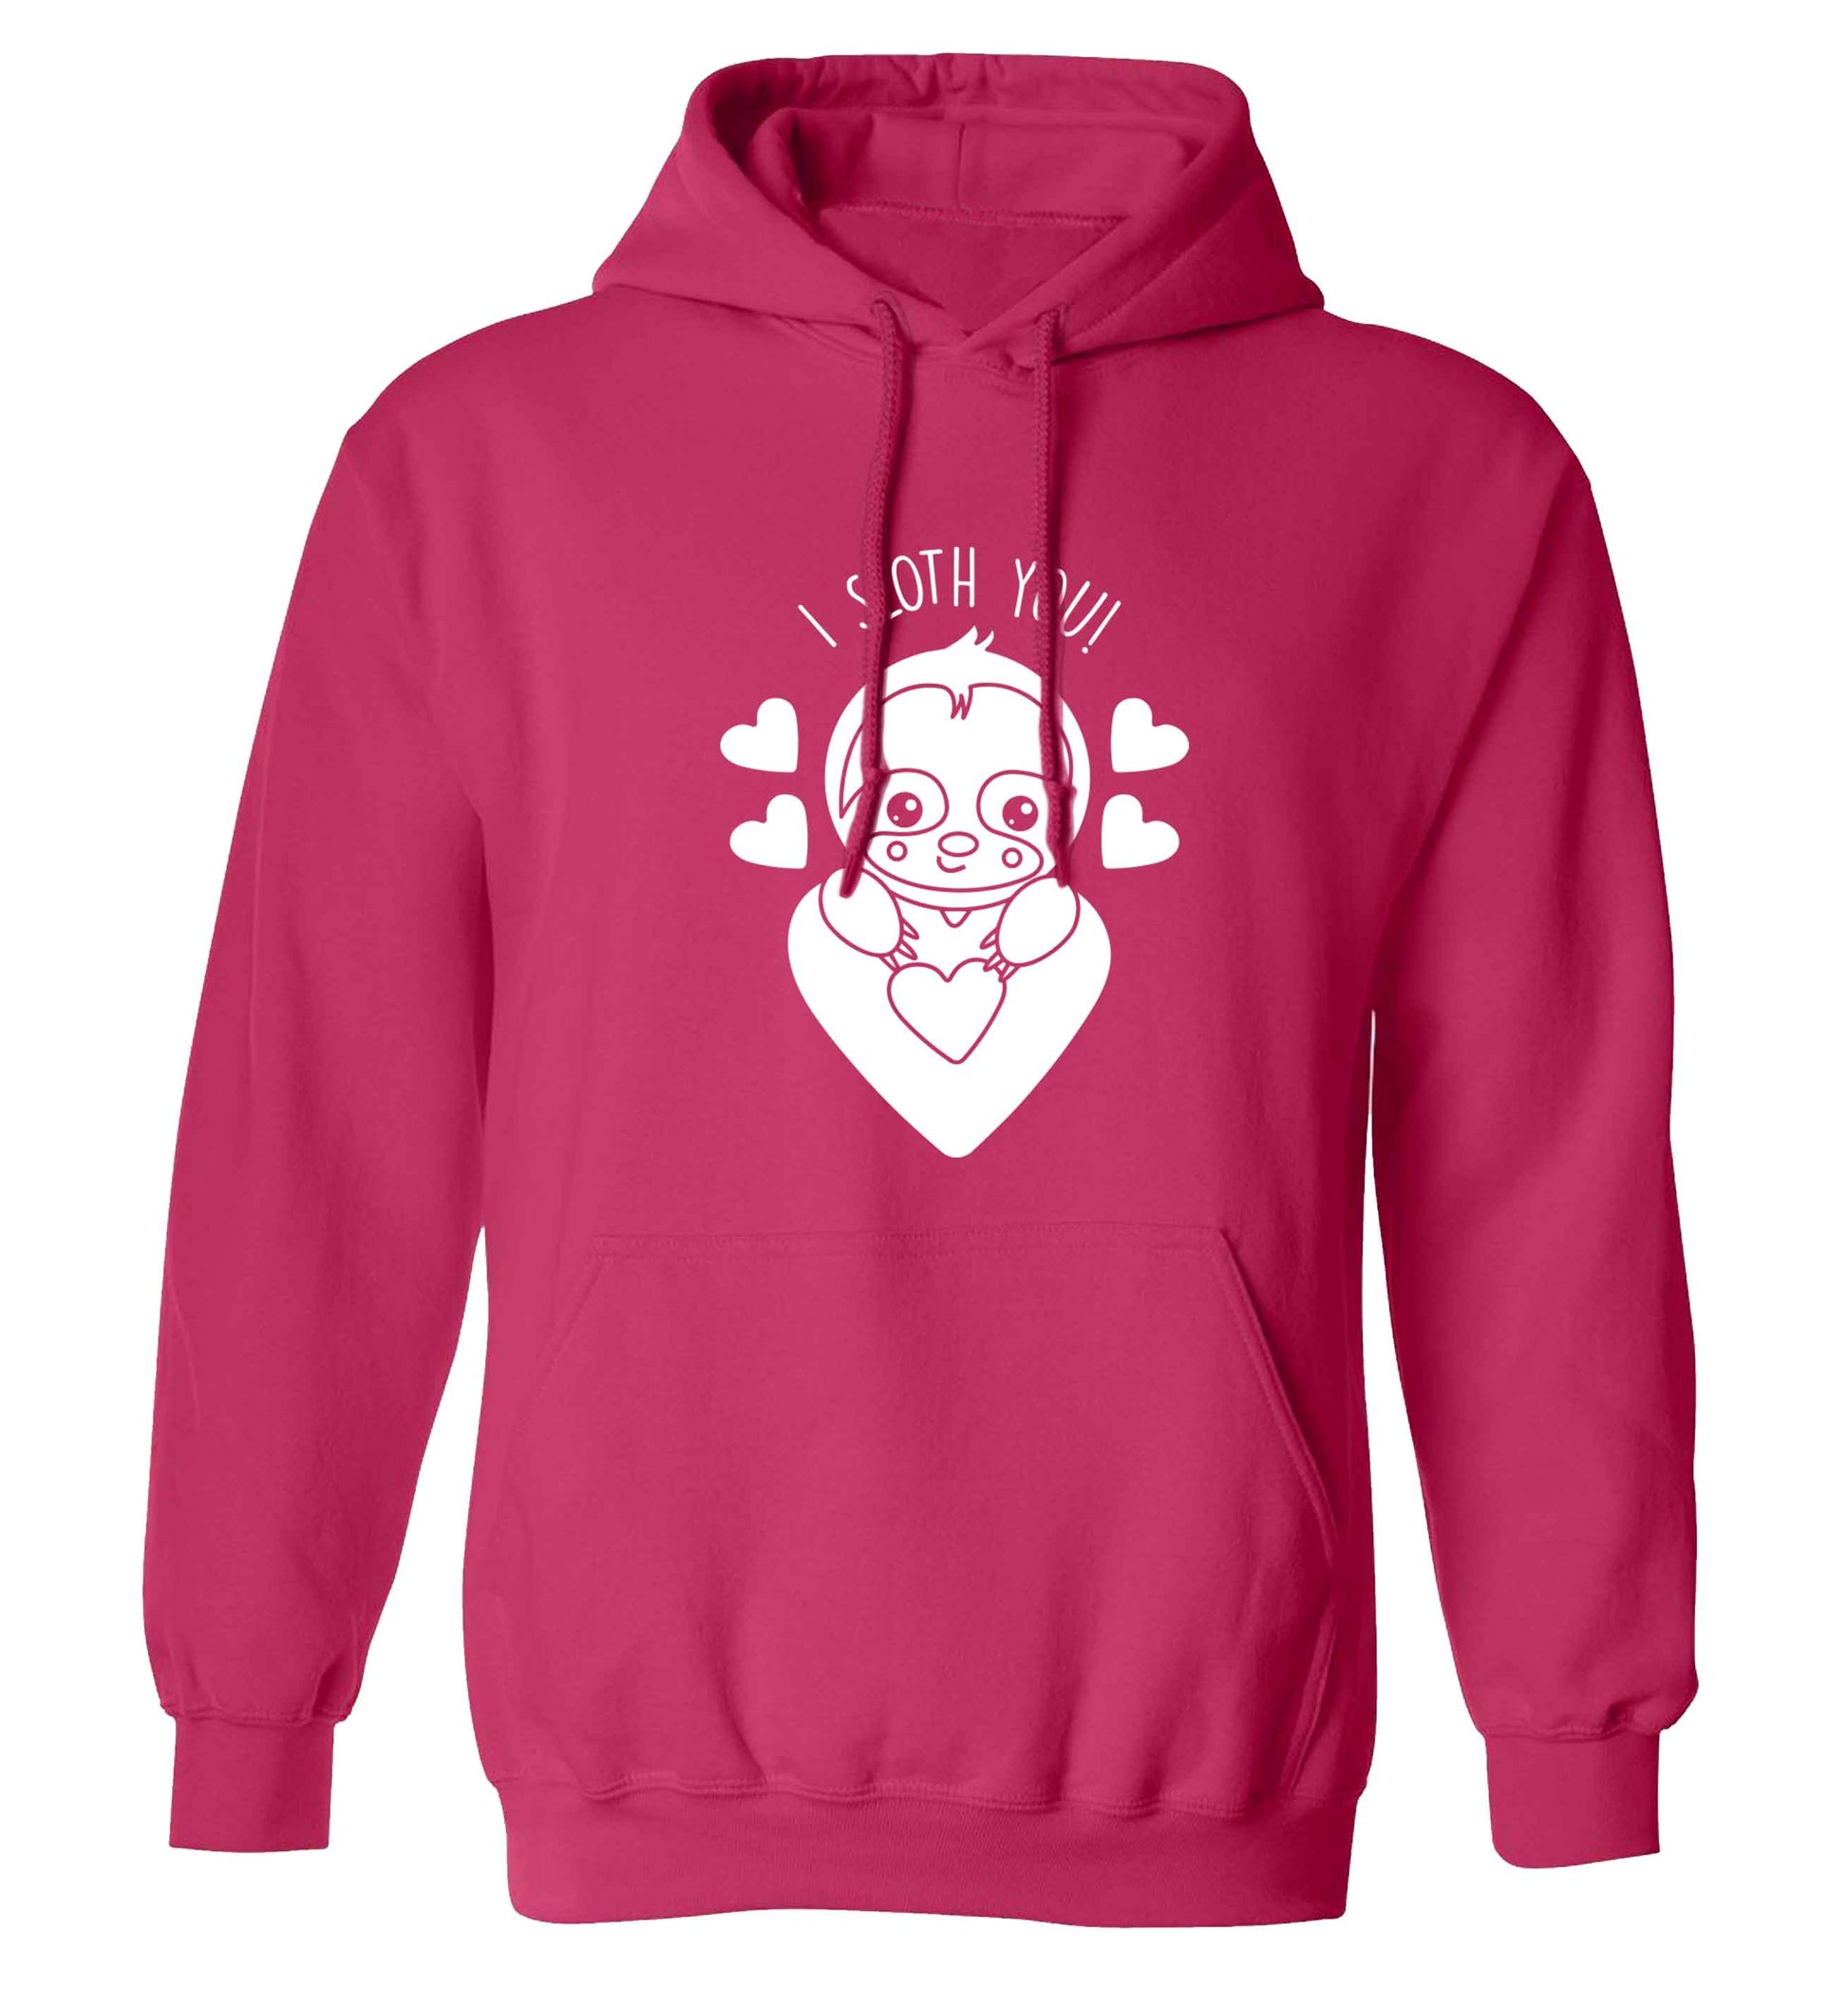 I sloth you adults unisex pink hoodie 2XL